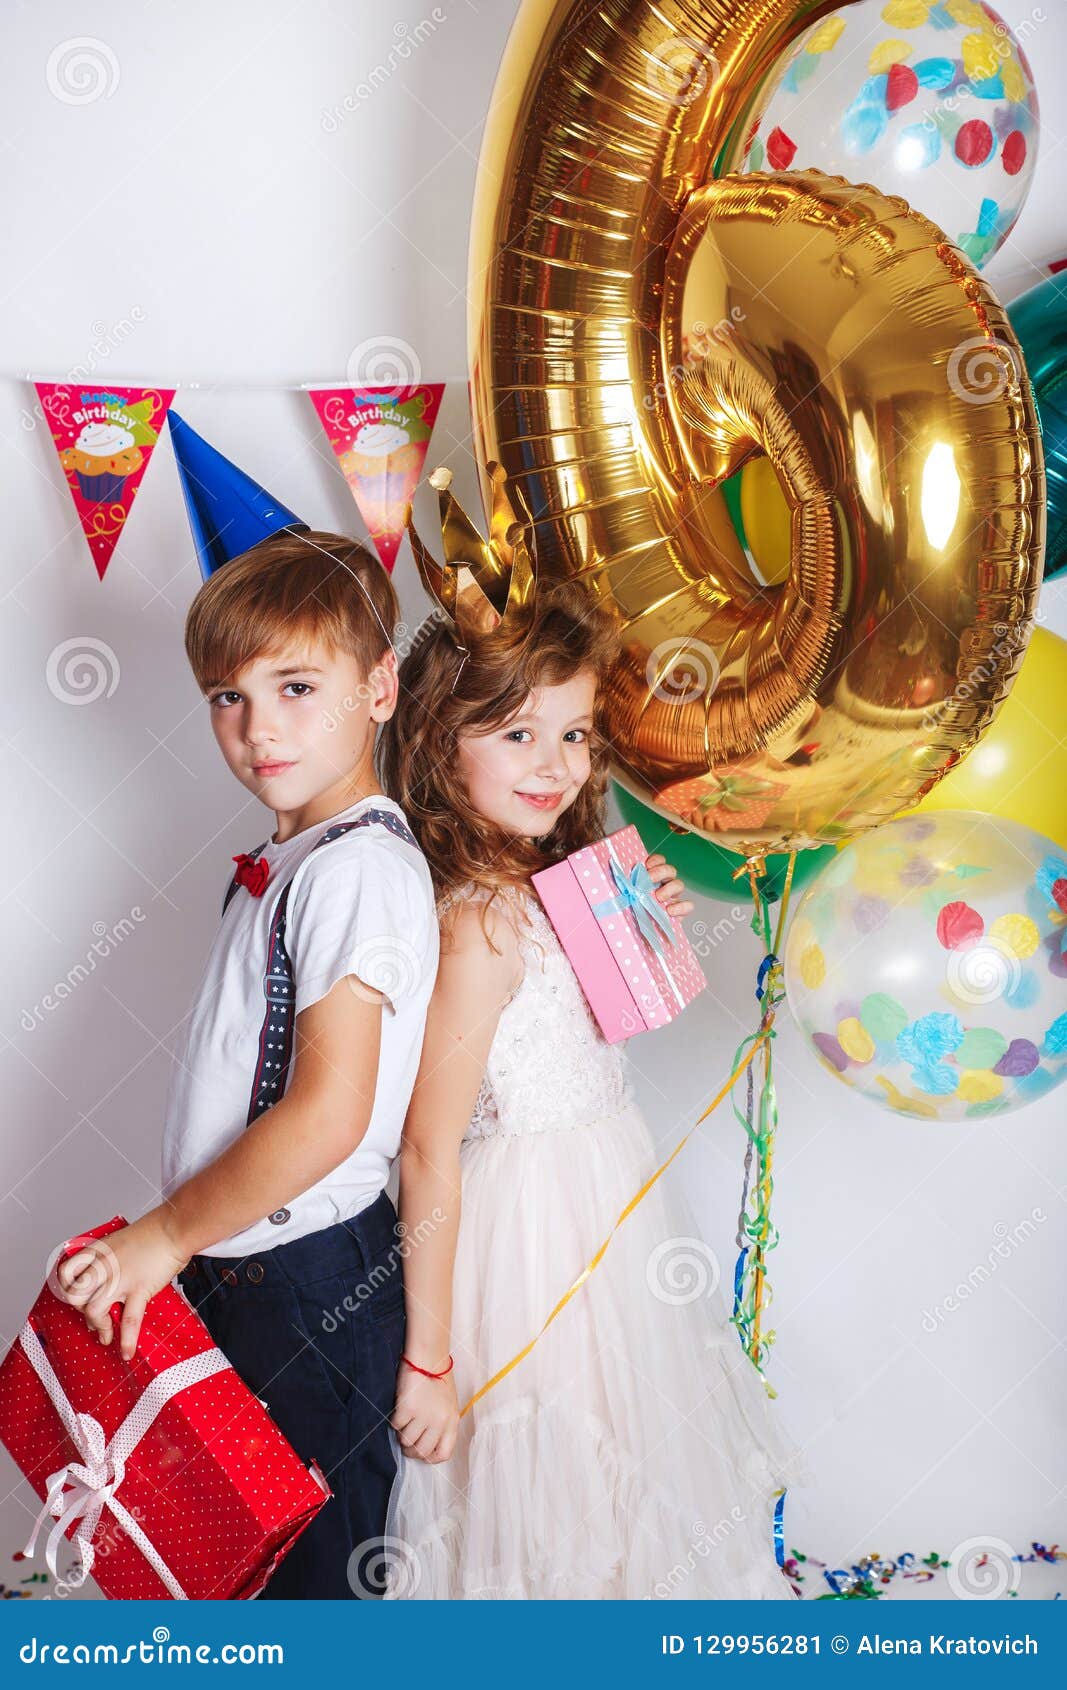 Group Of Kids Celebrate Birthday Party Together Stock Image - Image of ... Funny Party Time Images